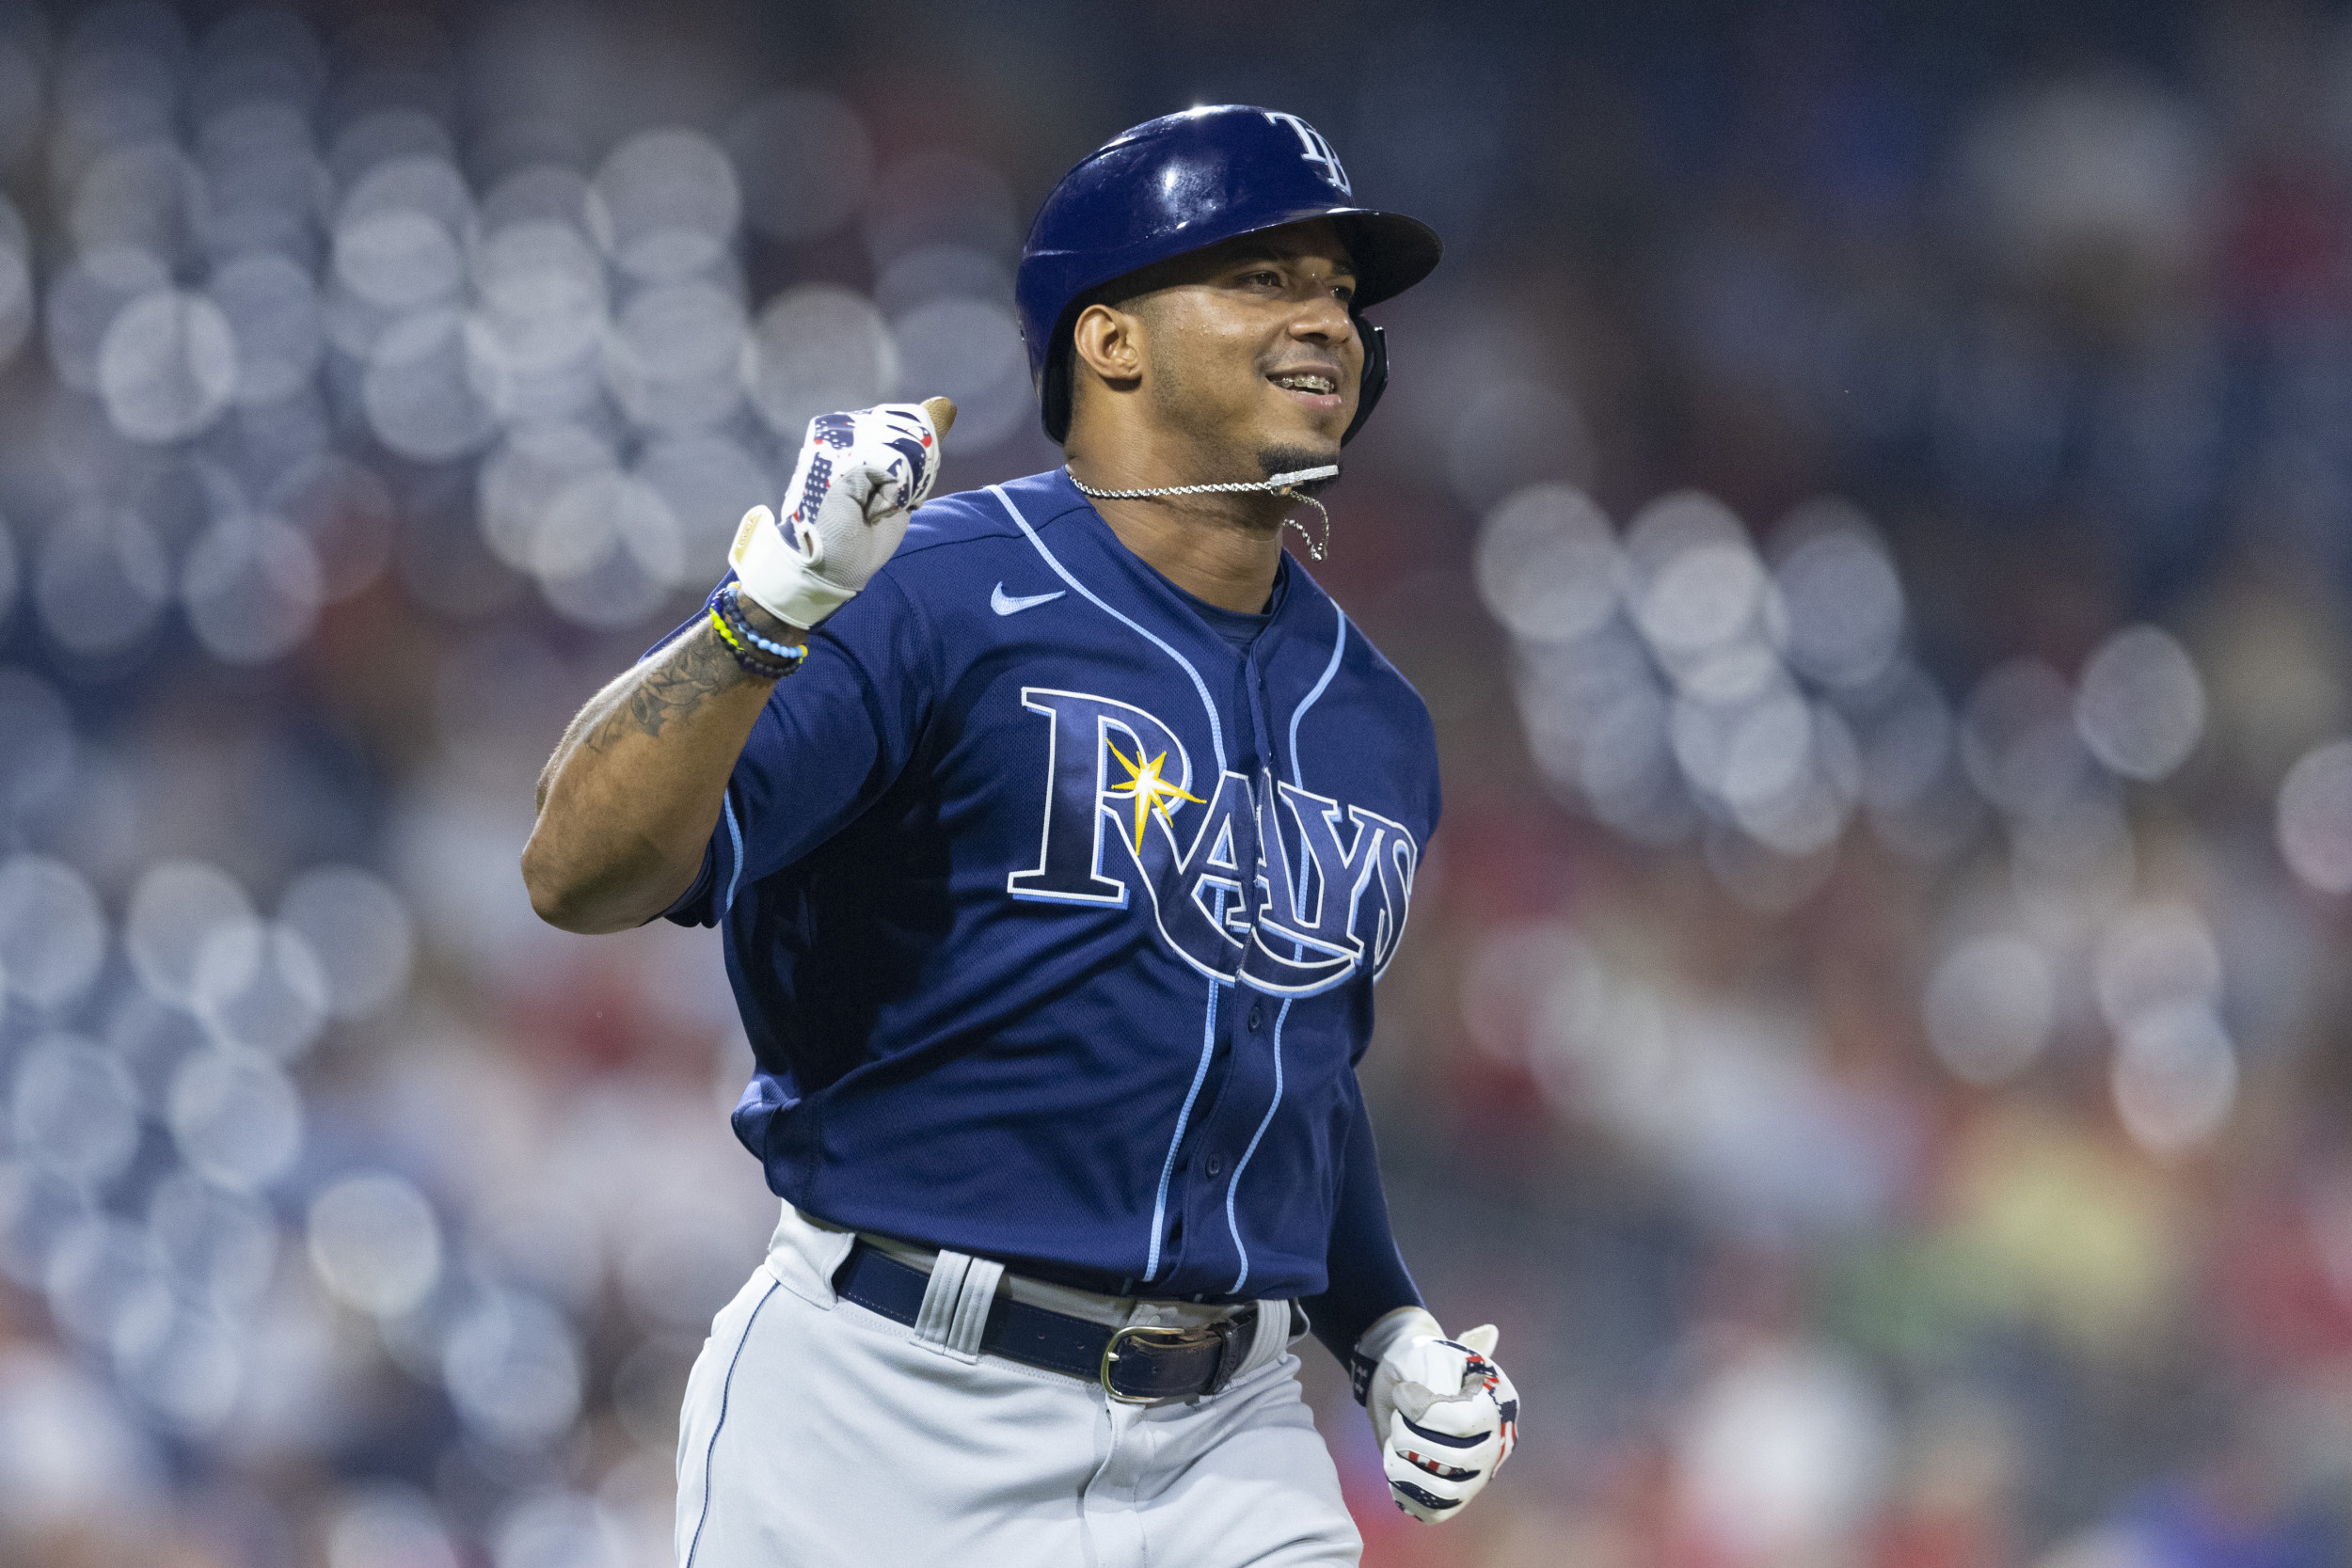 Rays' Wander Franco Joins Exclusive Company With Recent On-Base Streak